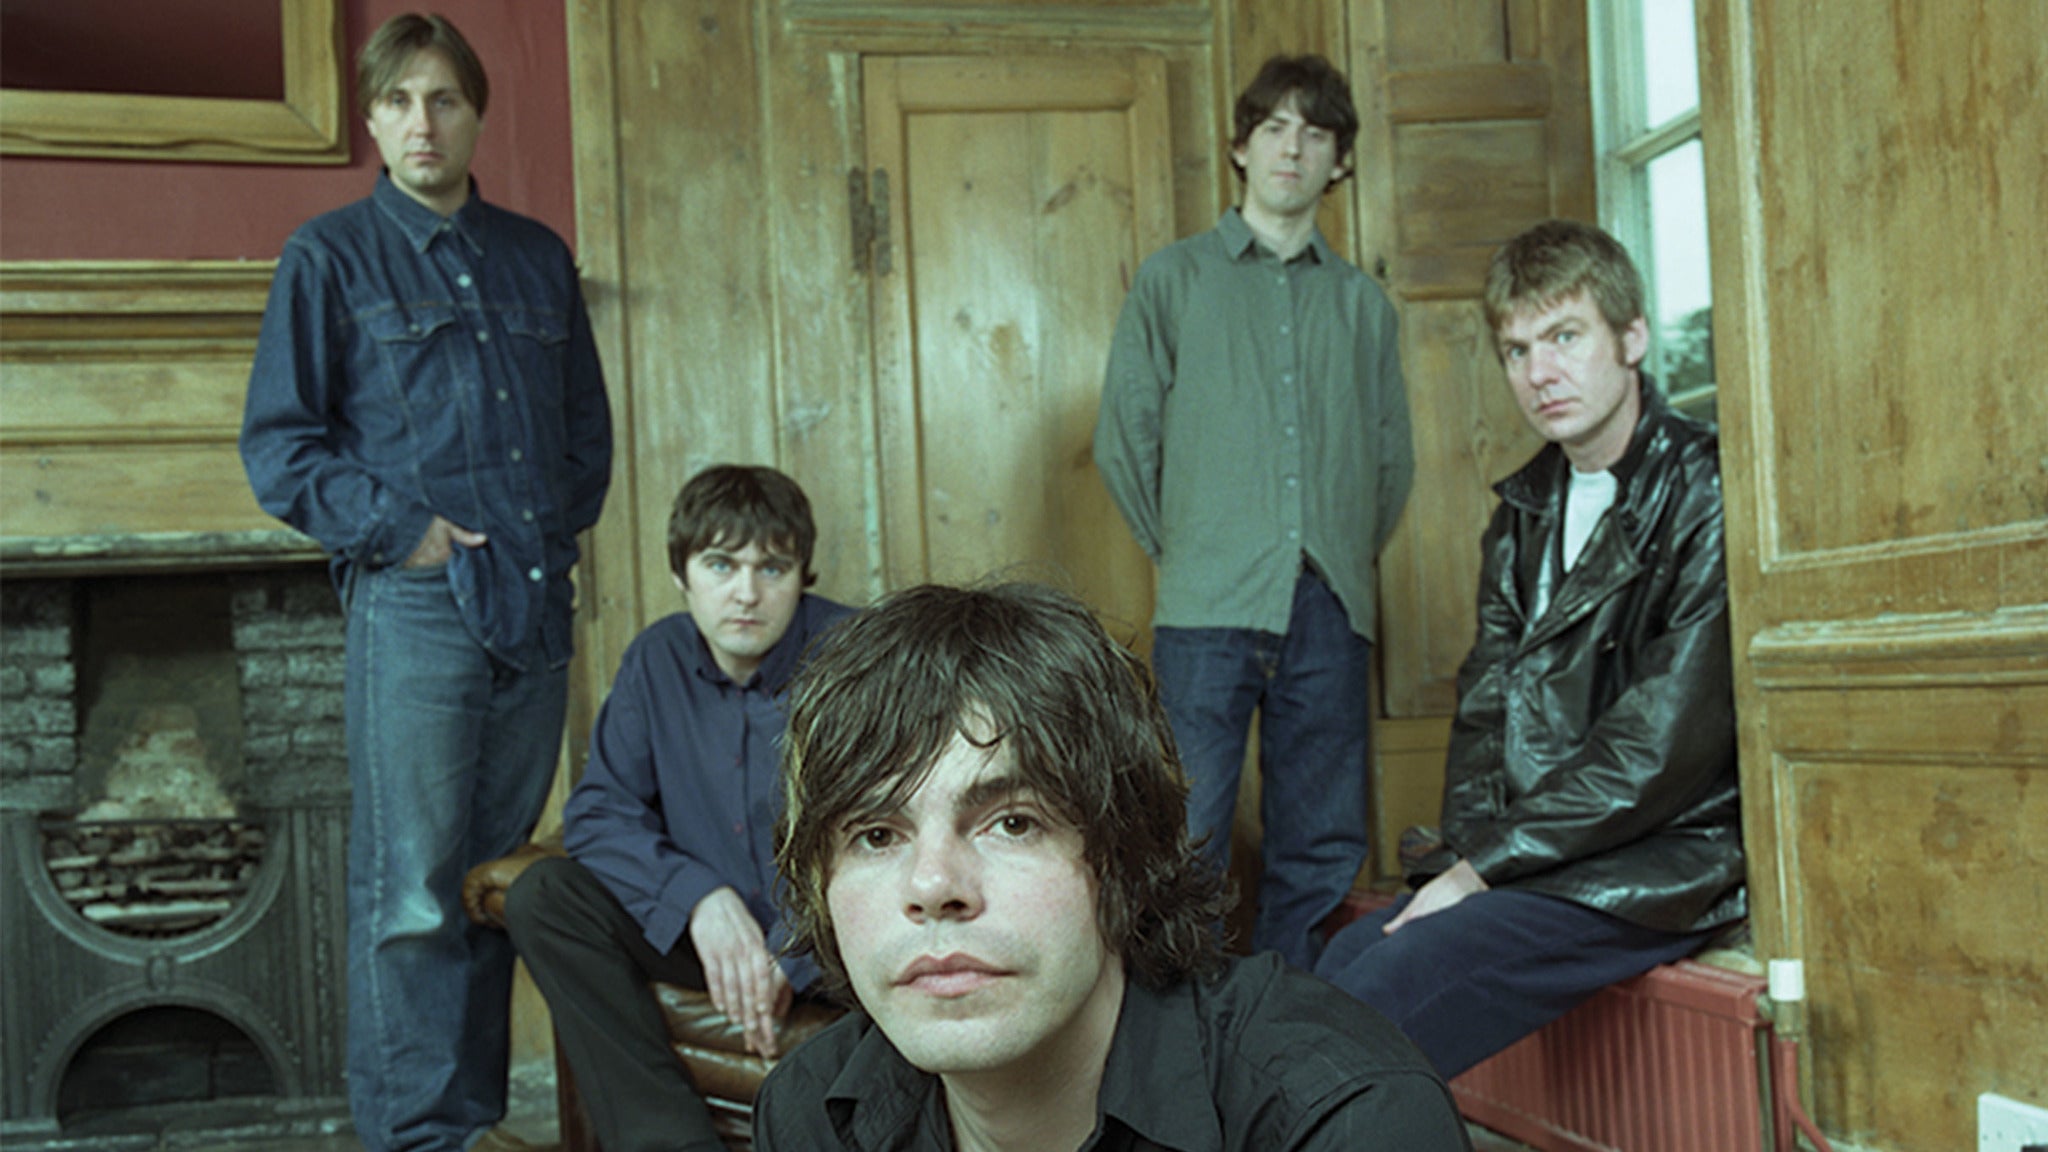 Image used with permission from Ticketmaster | The Charlatans tickets